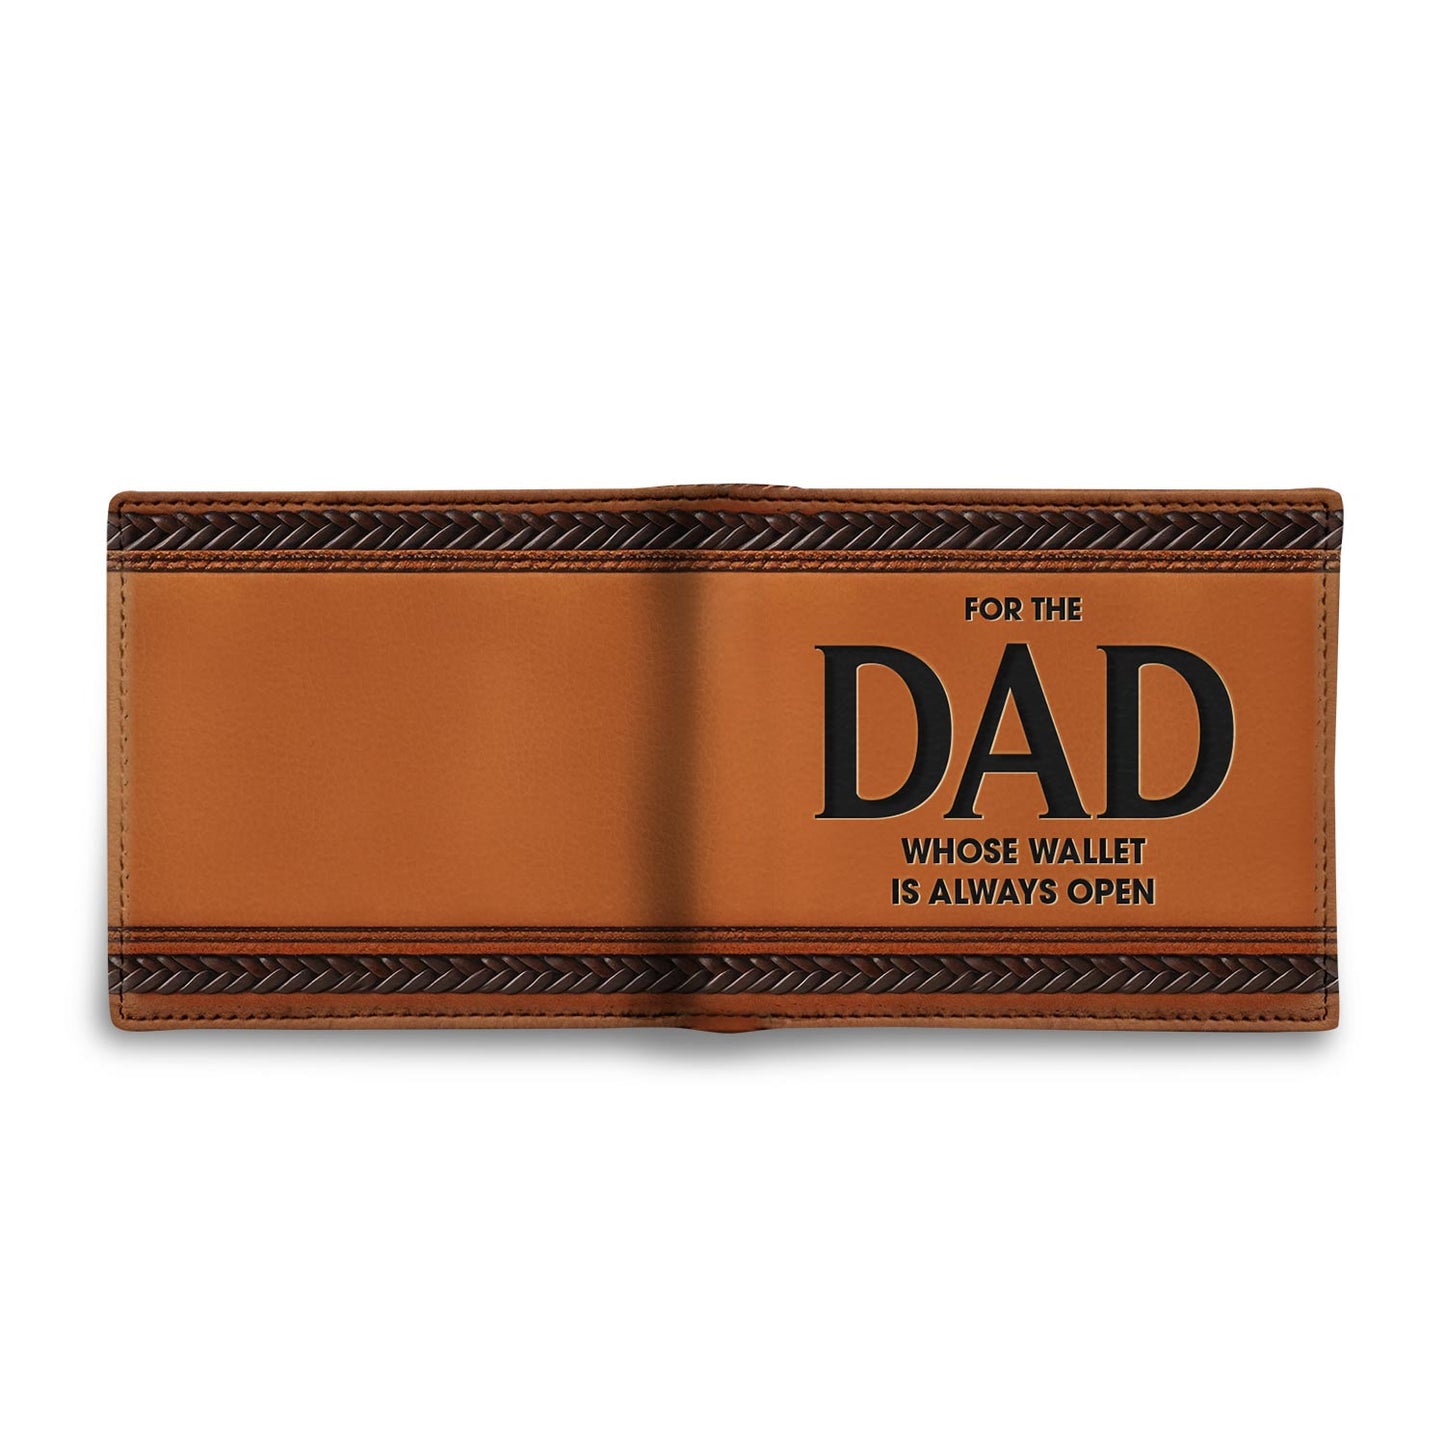 For The Dad Whose Wallet Is Always Open - Men's Leather Wallet - MW30